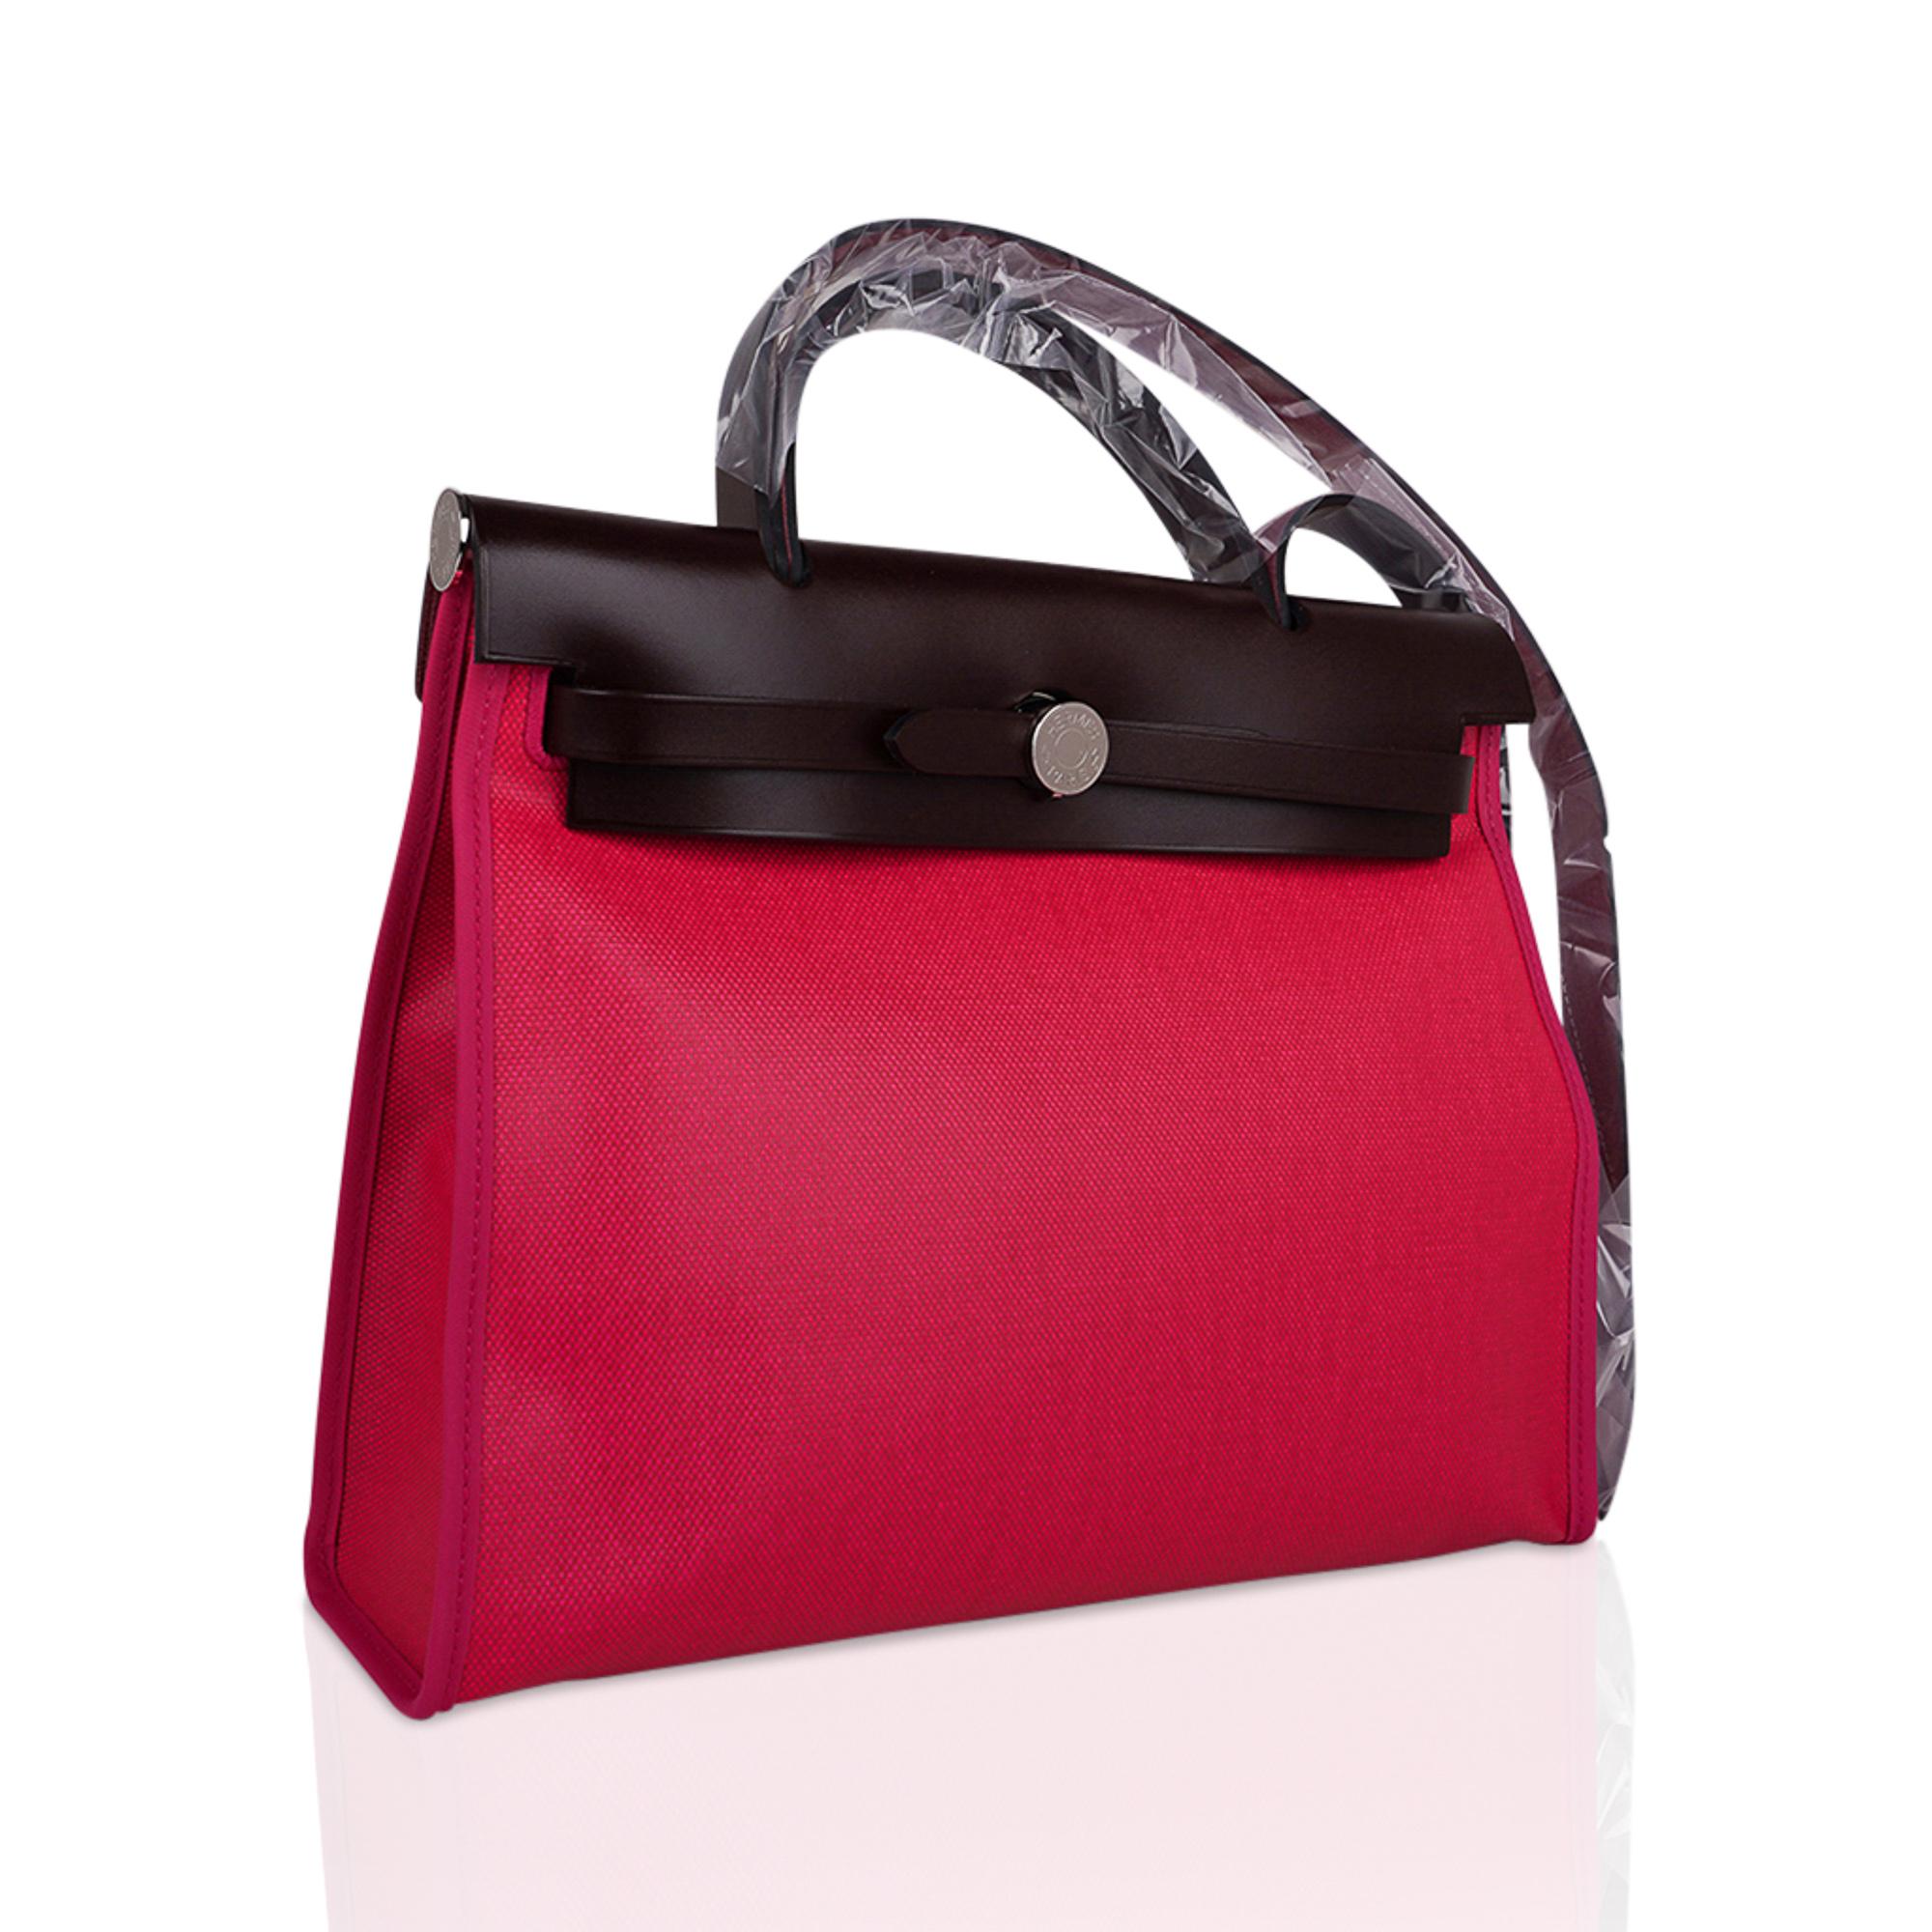 Mightychic offers an Hermes Herbag Zip 31 featured in Rose Shocking Berline, a coated canvas and Rouge Sellier leather.
Signature Herbag Clou de Selle in Palladium hardware.
Has a matching removable pochette.
Comes with lock, keys and clochette,